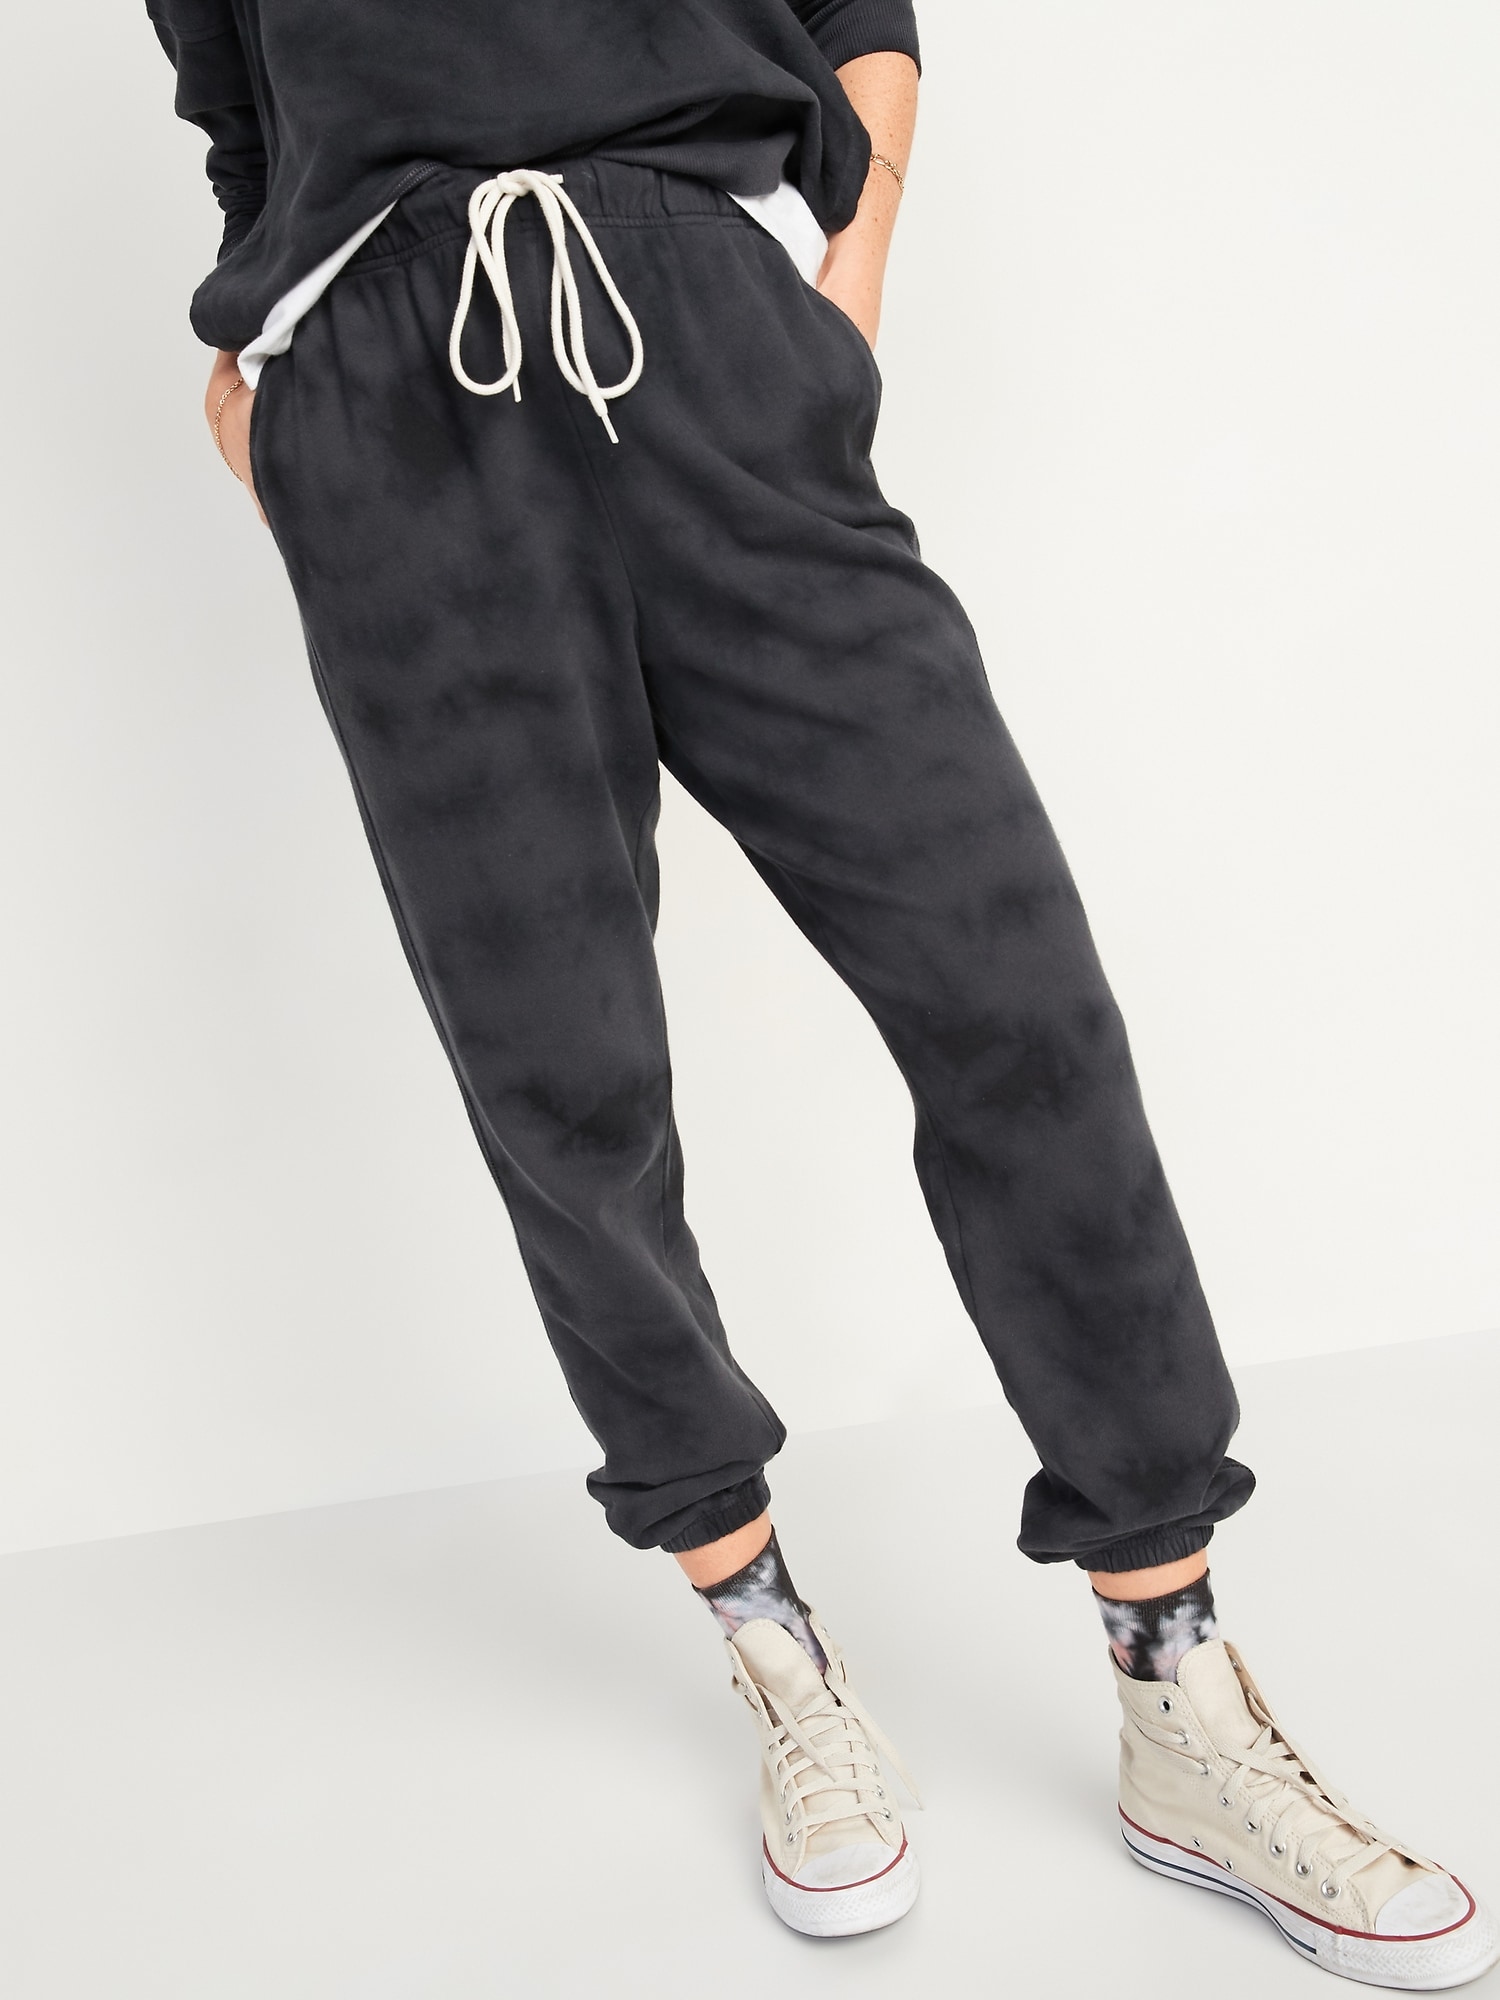 Extra High-Waisted Vintage Specially Dyed Sweatpants for Women